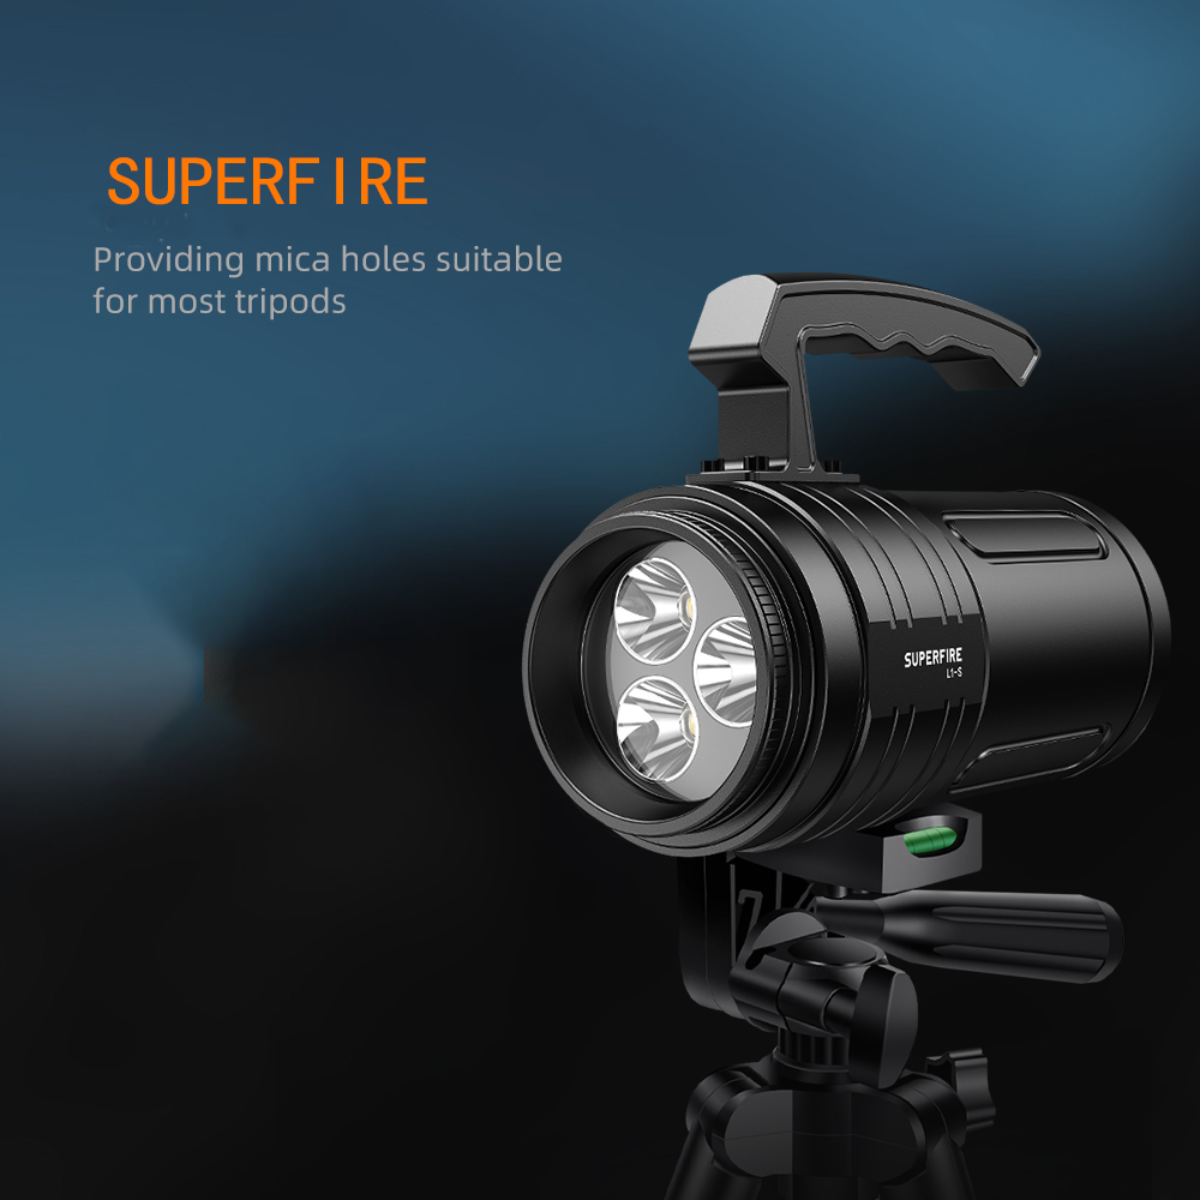 Superfire Provides A New High Lumen Torch, With Revolutionary Safety Features